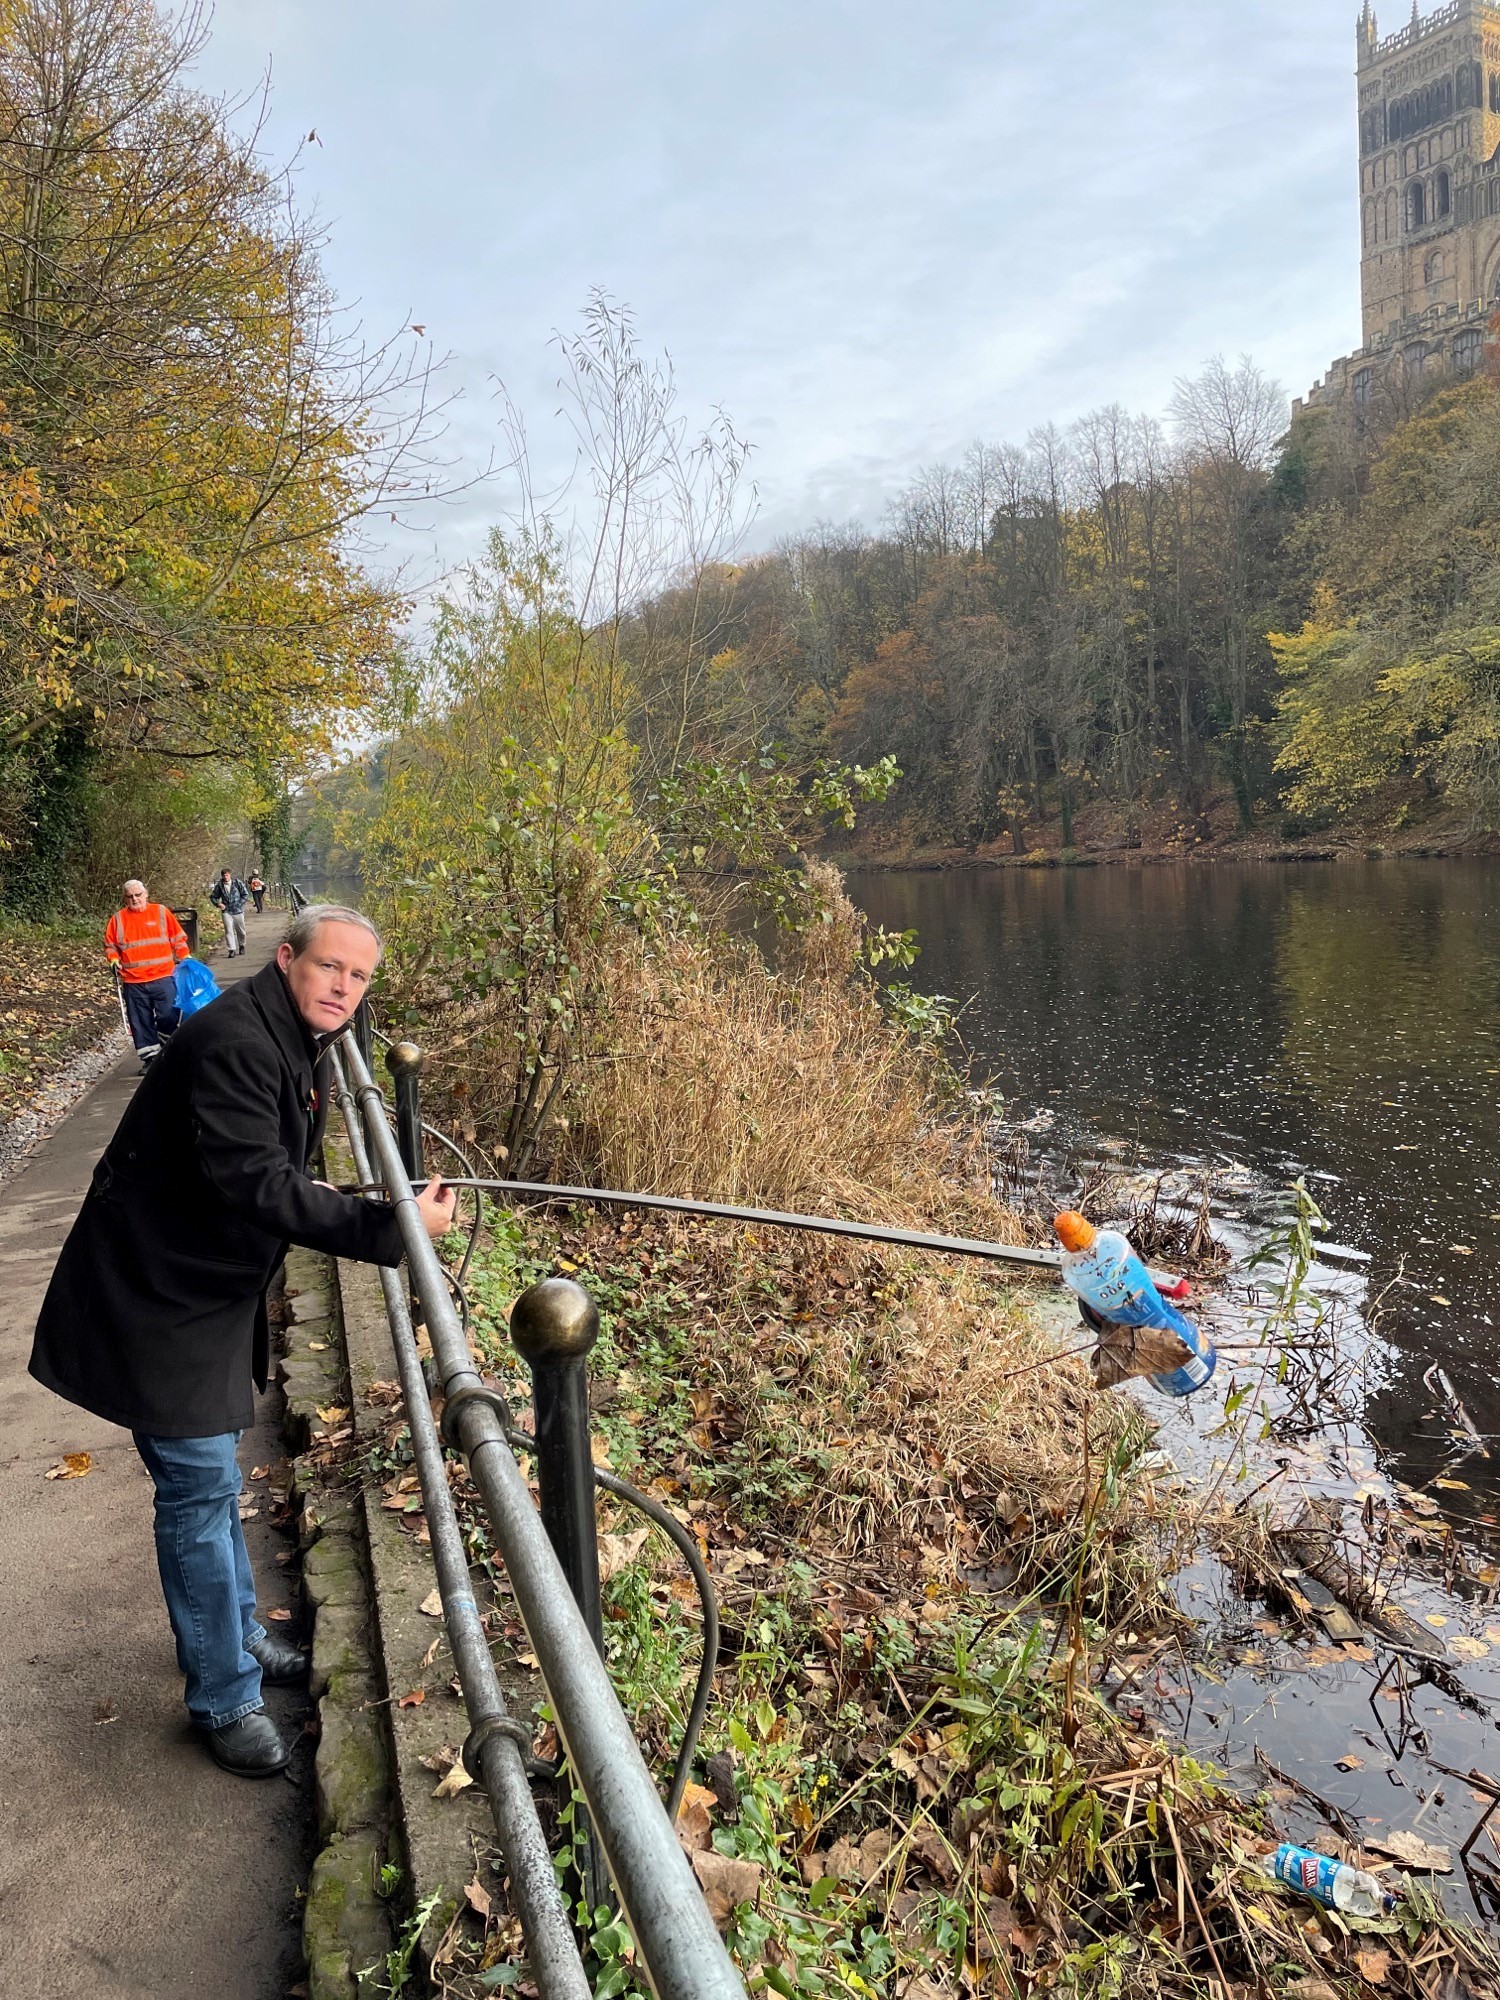 Rubbish being cleared from the River Wear in Durham City centre